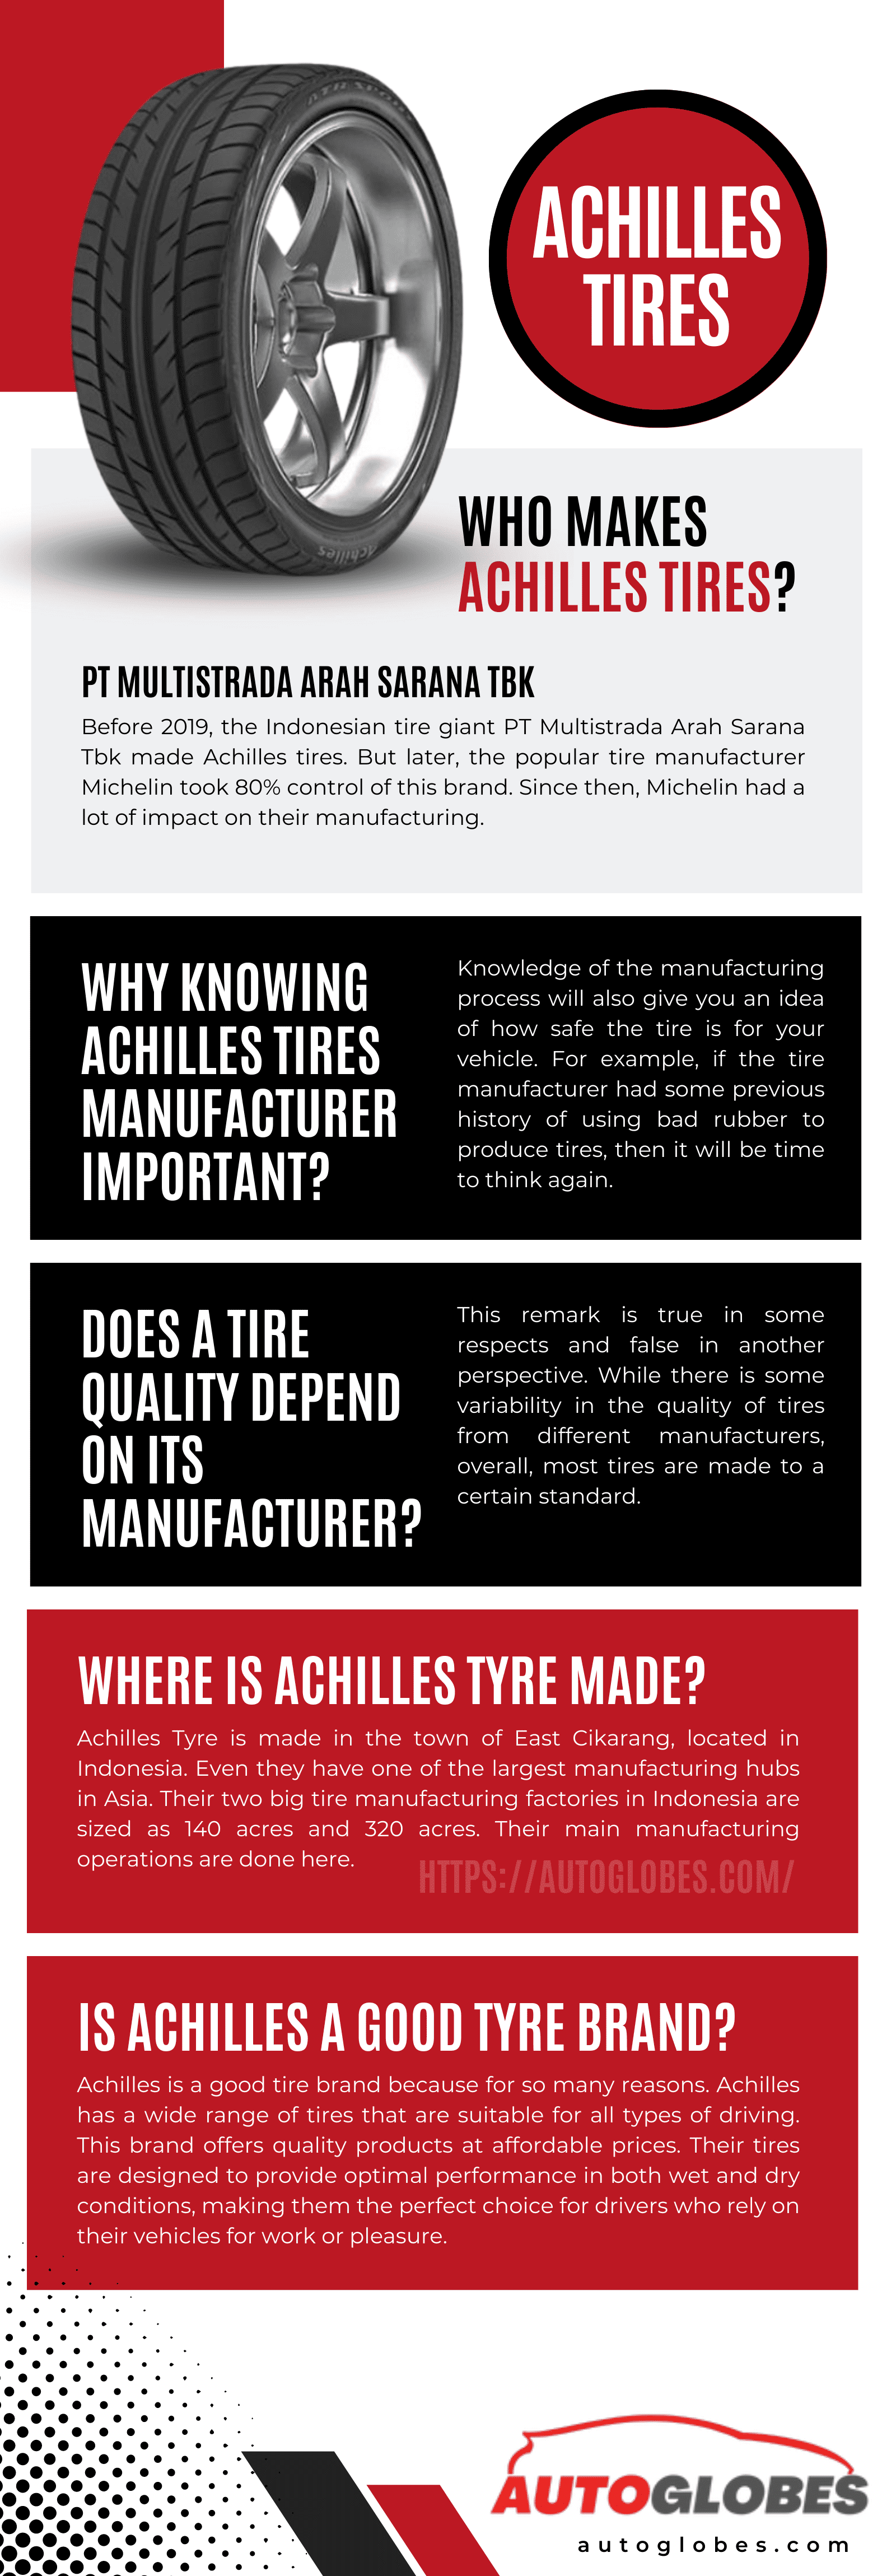 Makers of ACHILLES TIRES Infographic